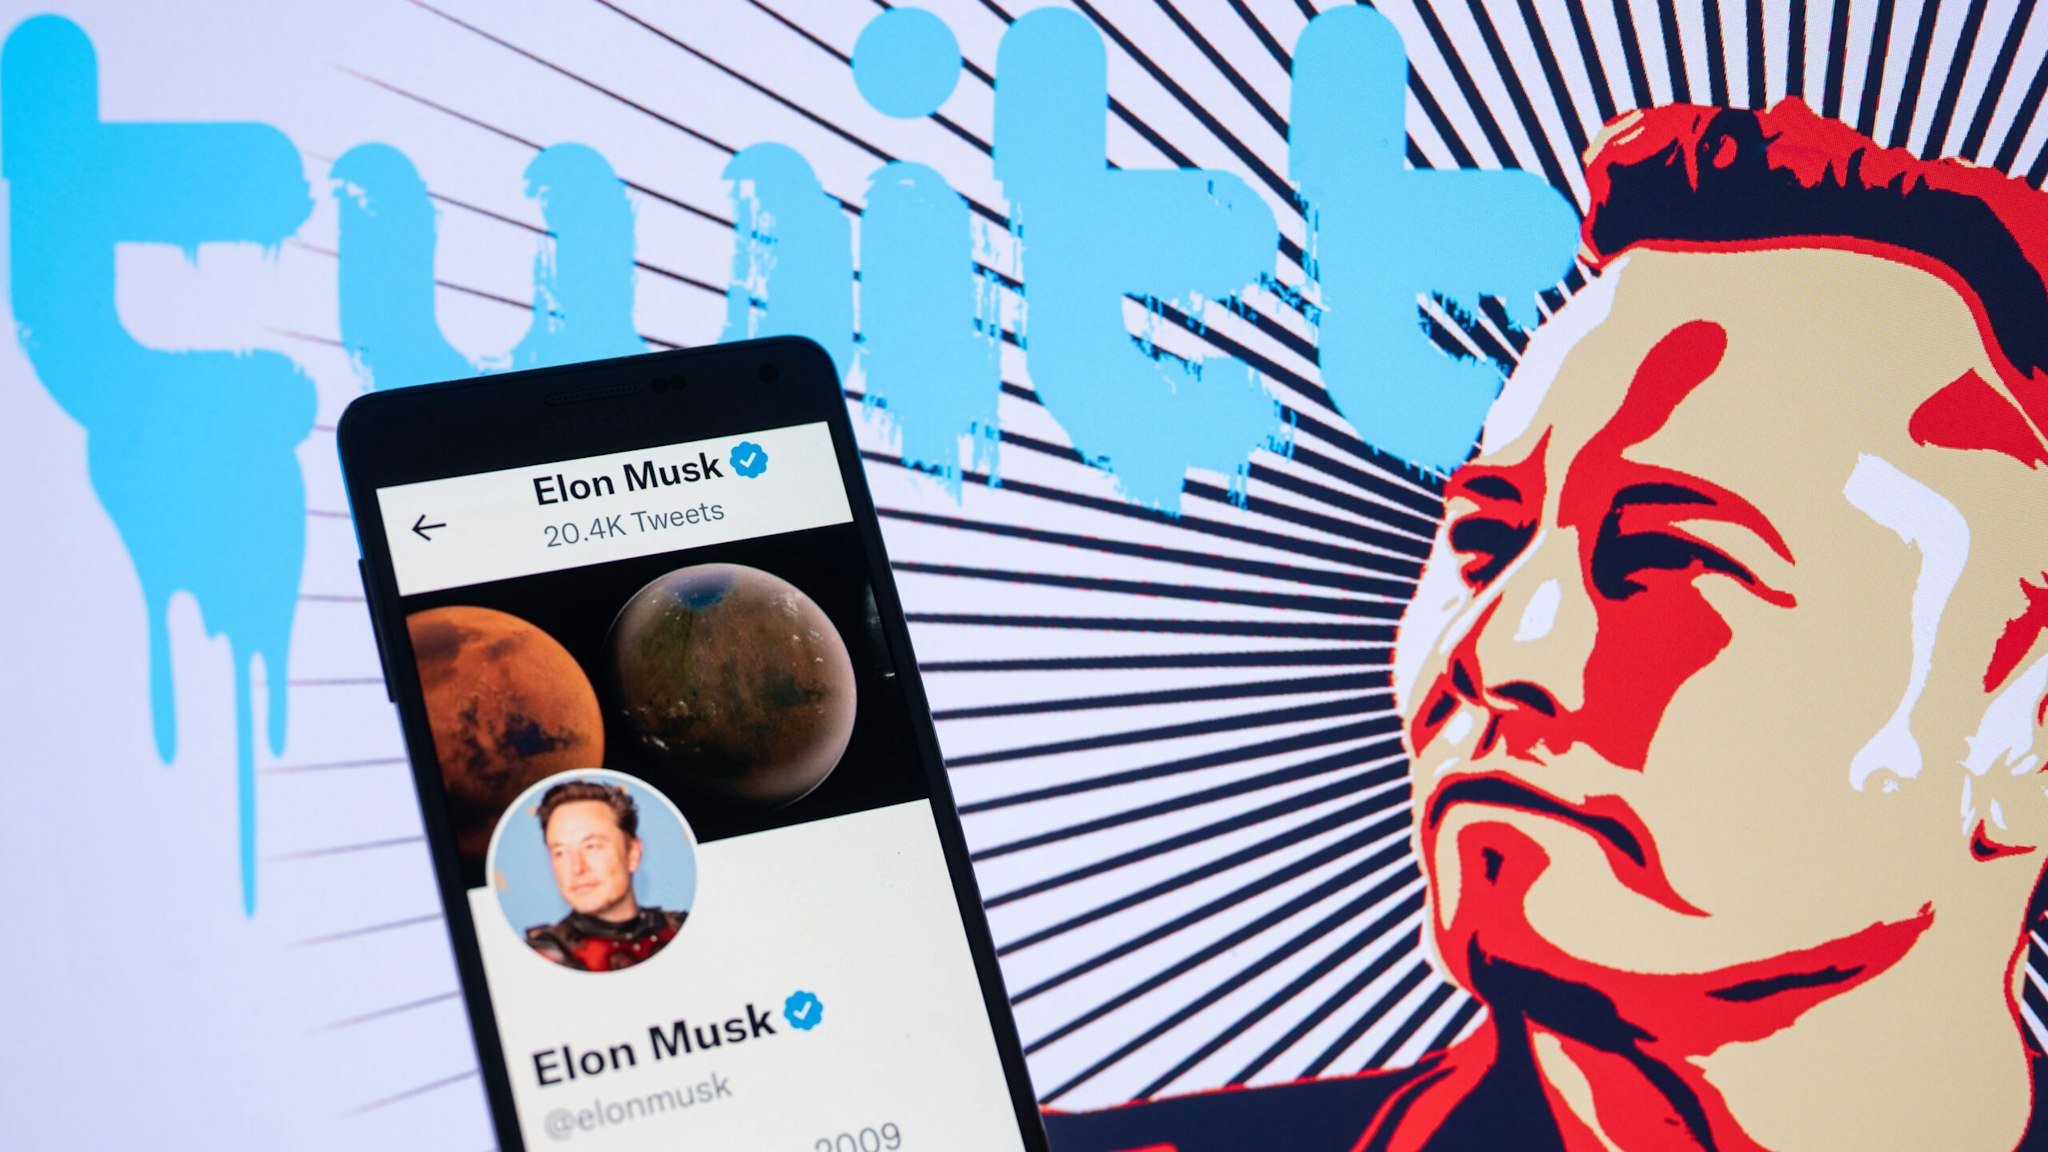 Elon Musk's Twitter account displayed on a mobile with Elon Musk in the background are seen in this illustration. In Brussels - Belgium on 19 November 2022.